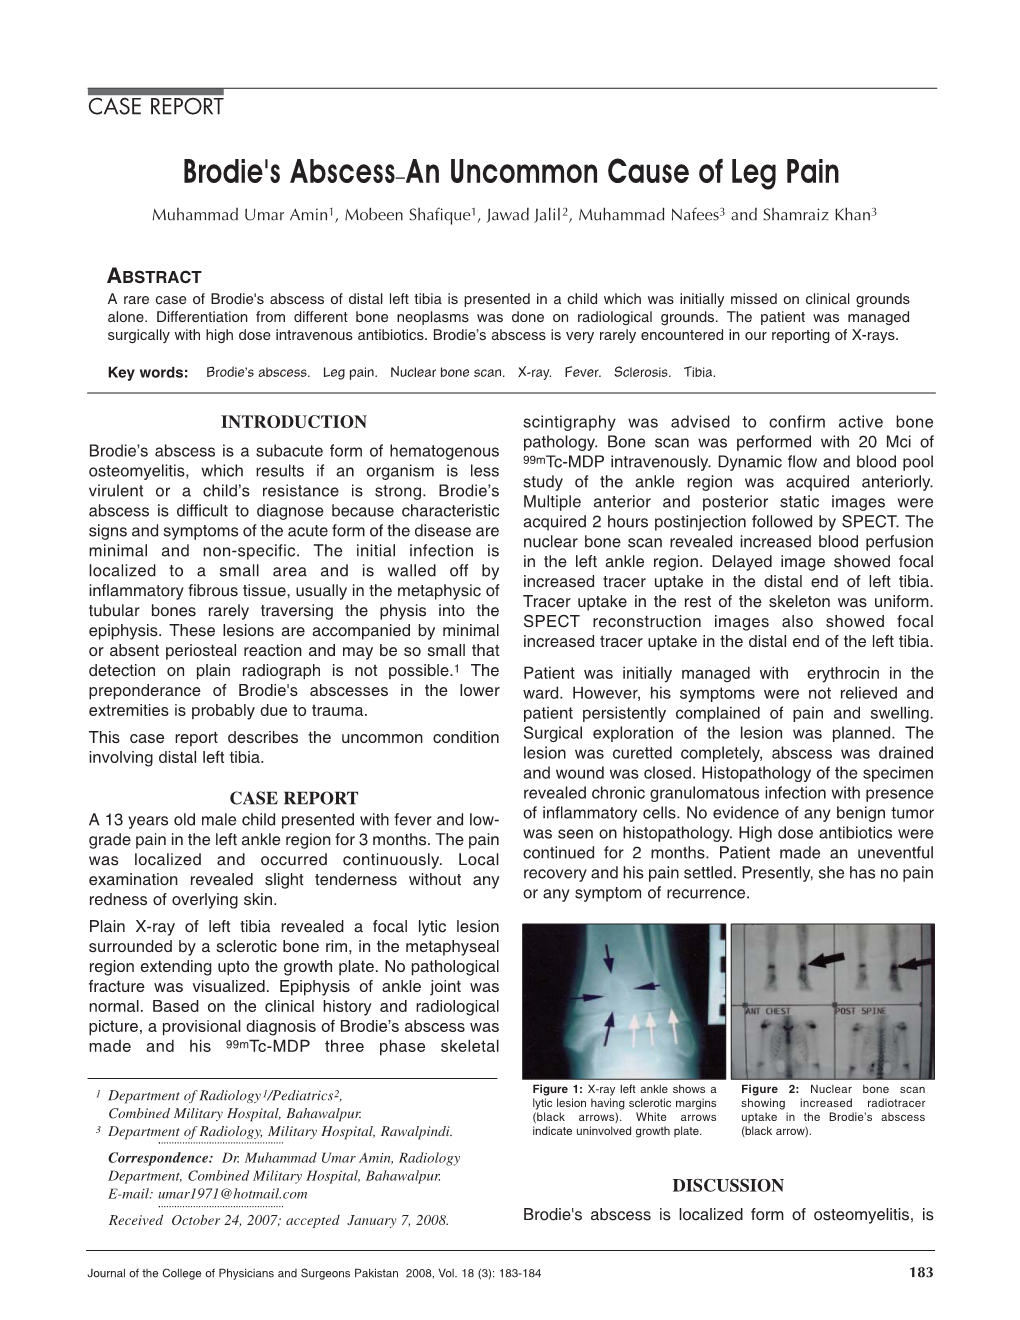 Brodie's Abscess–An Uncommon Cause of Leg Pain